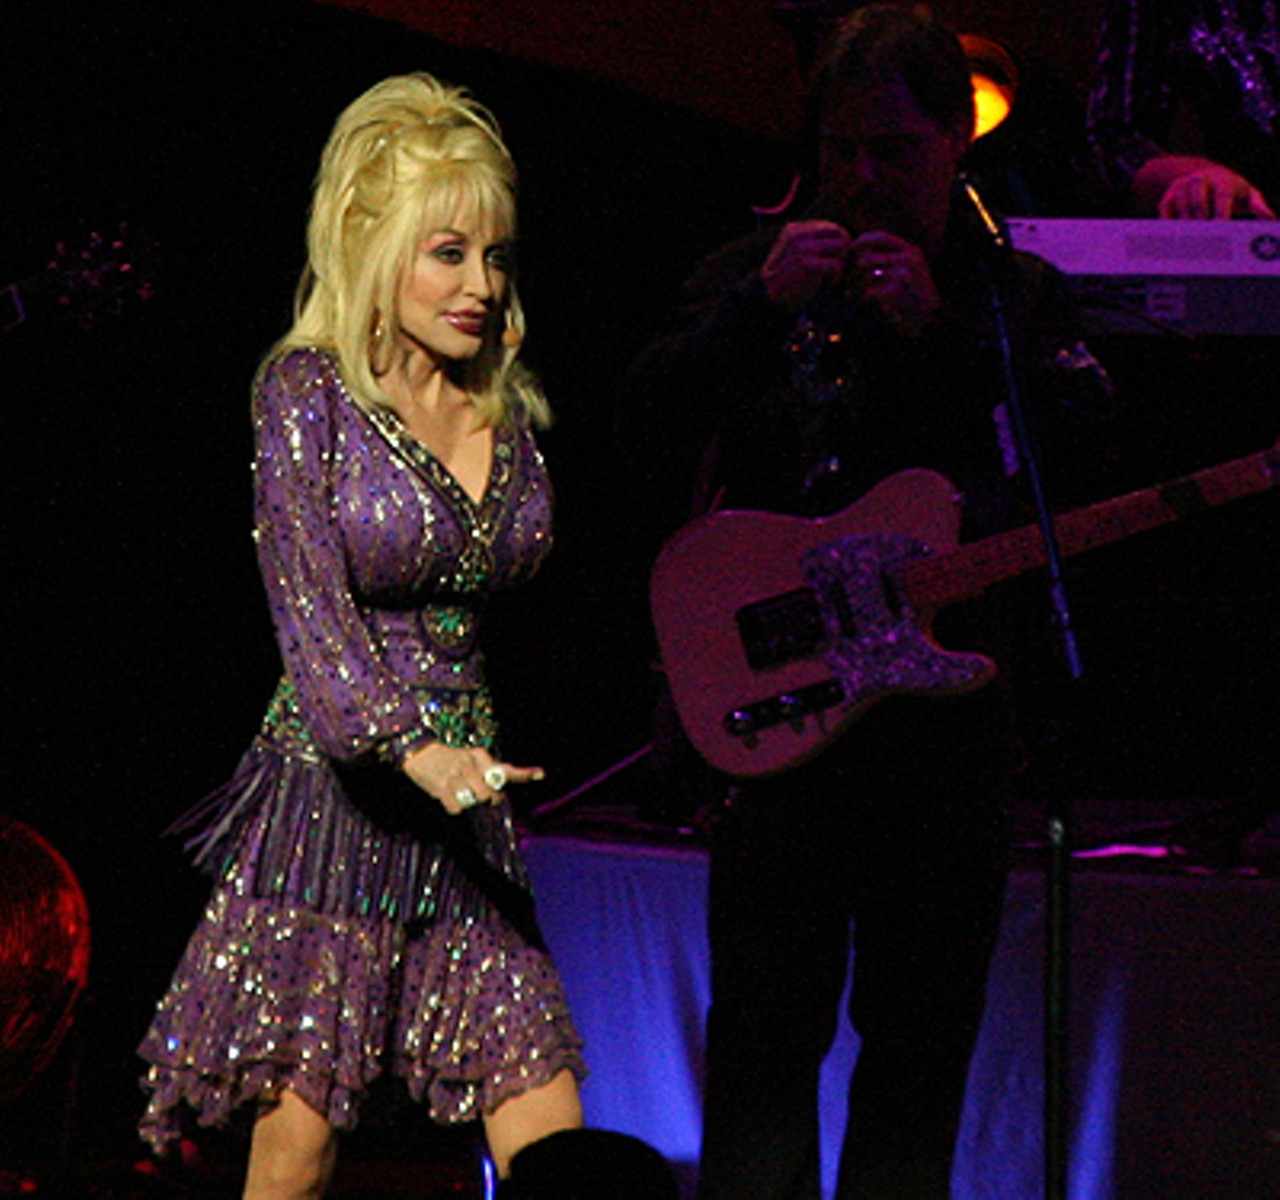 Backwoods & bedazzled, Dolly Parton performs on August 14, 2008 at the Fabulous Fox Theatre in St. Louis. 
Read the concert review and set list.